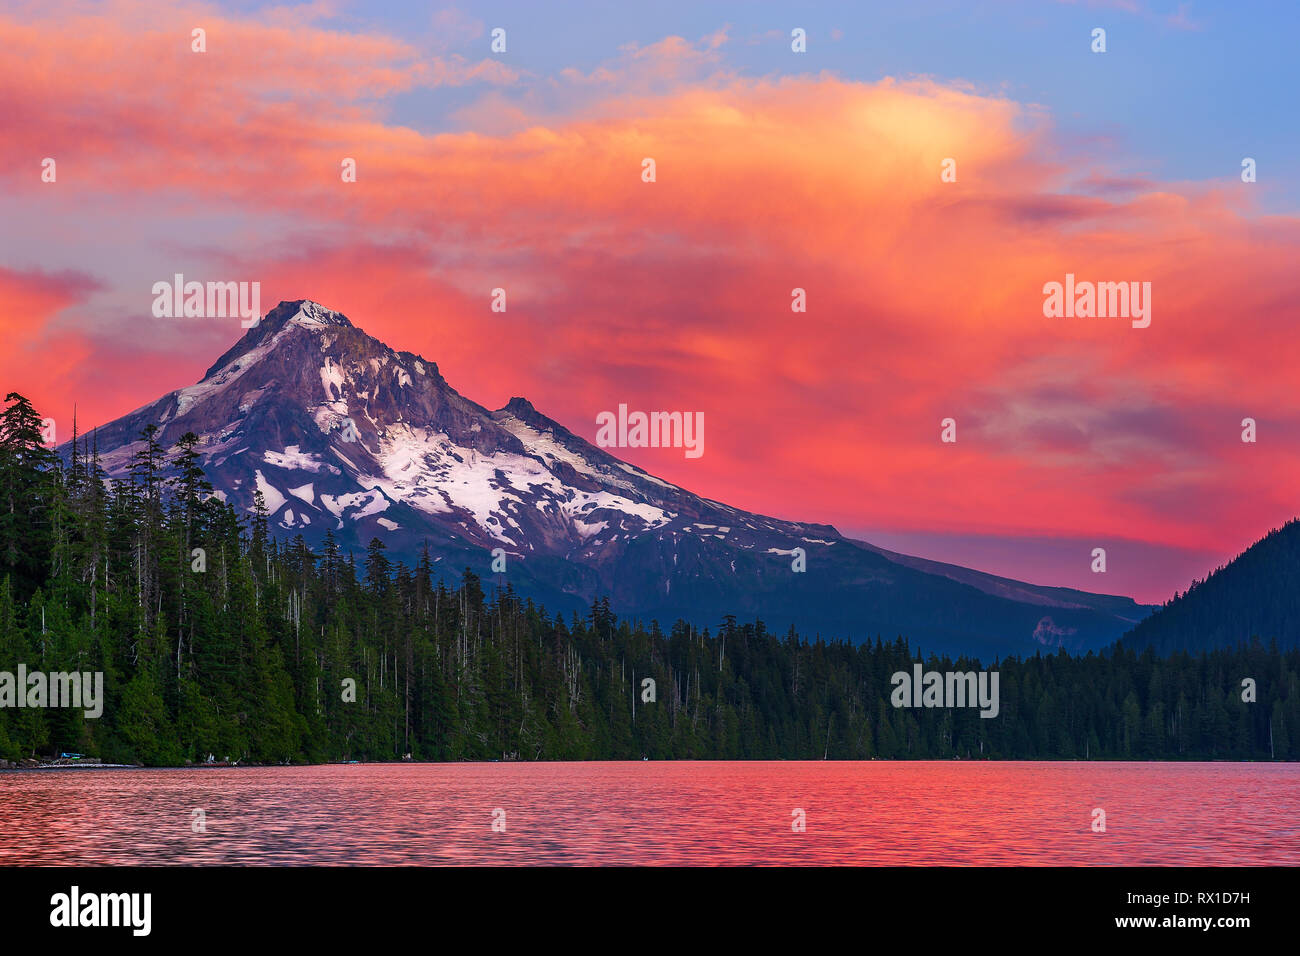 Colorful sunset sky over Mt. Hood from Lost Lake, Oregon, USA Stock Photo